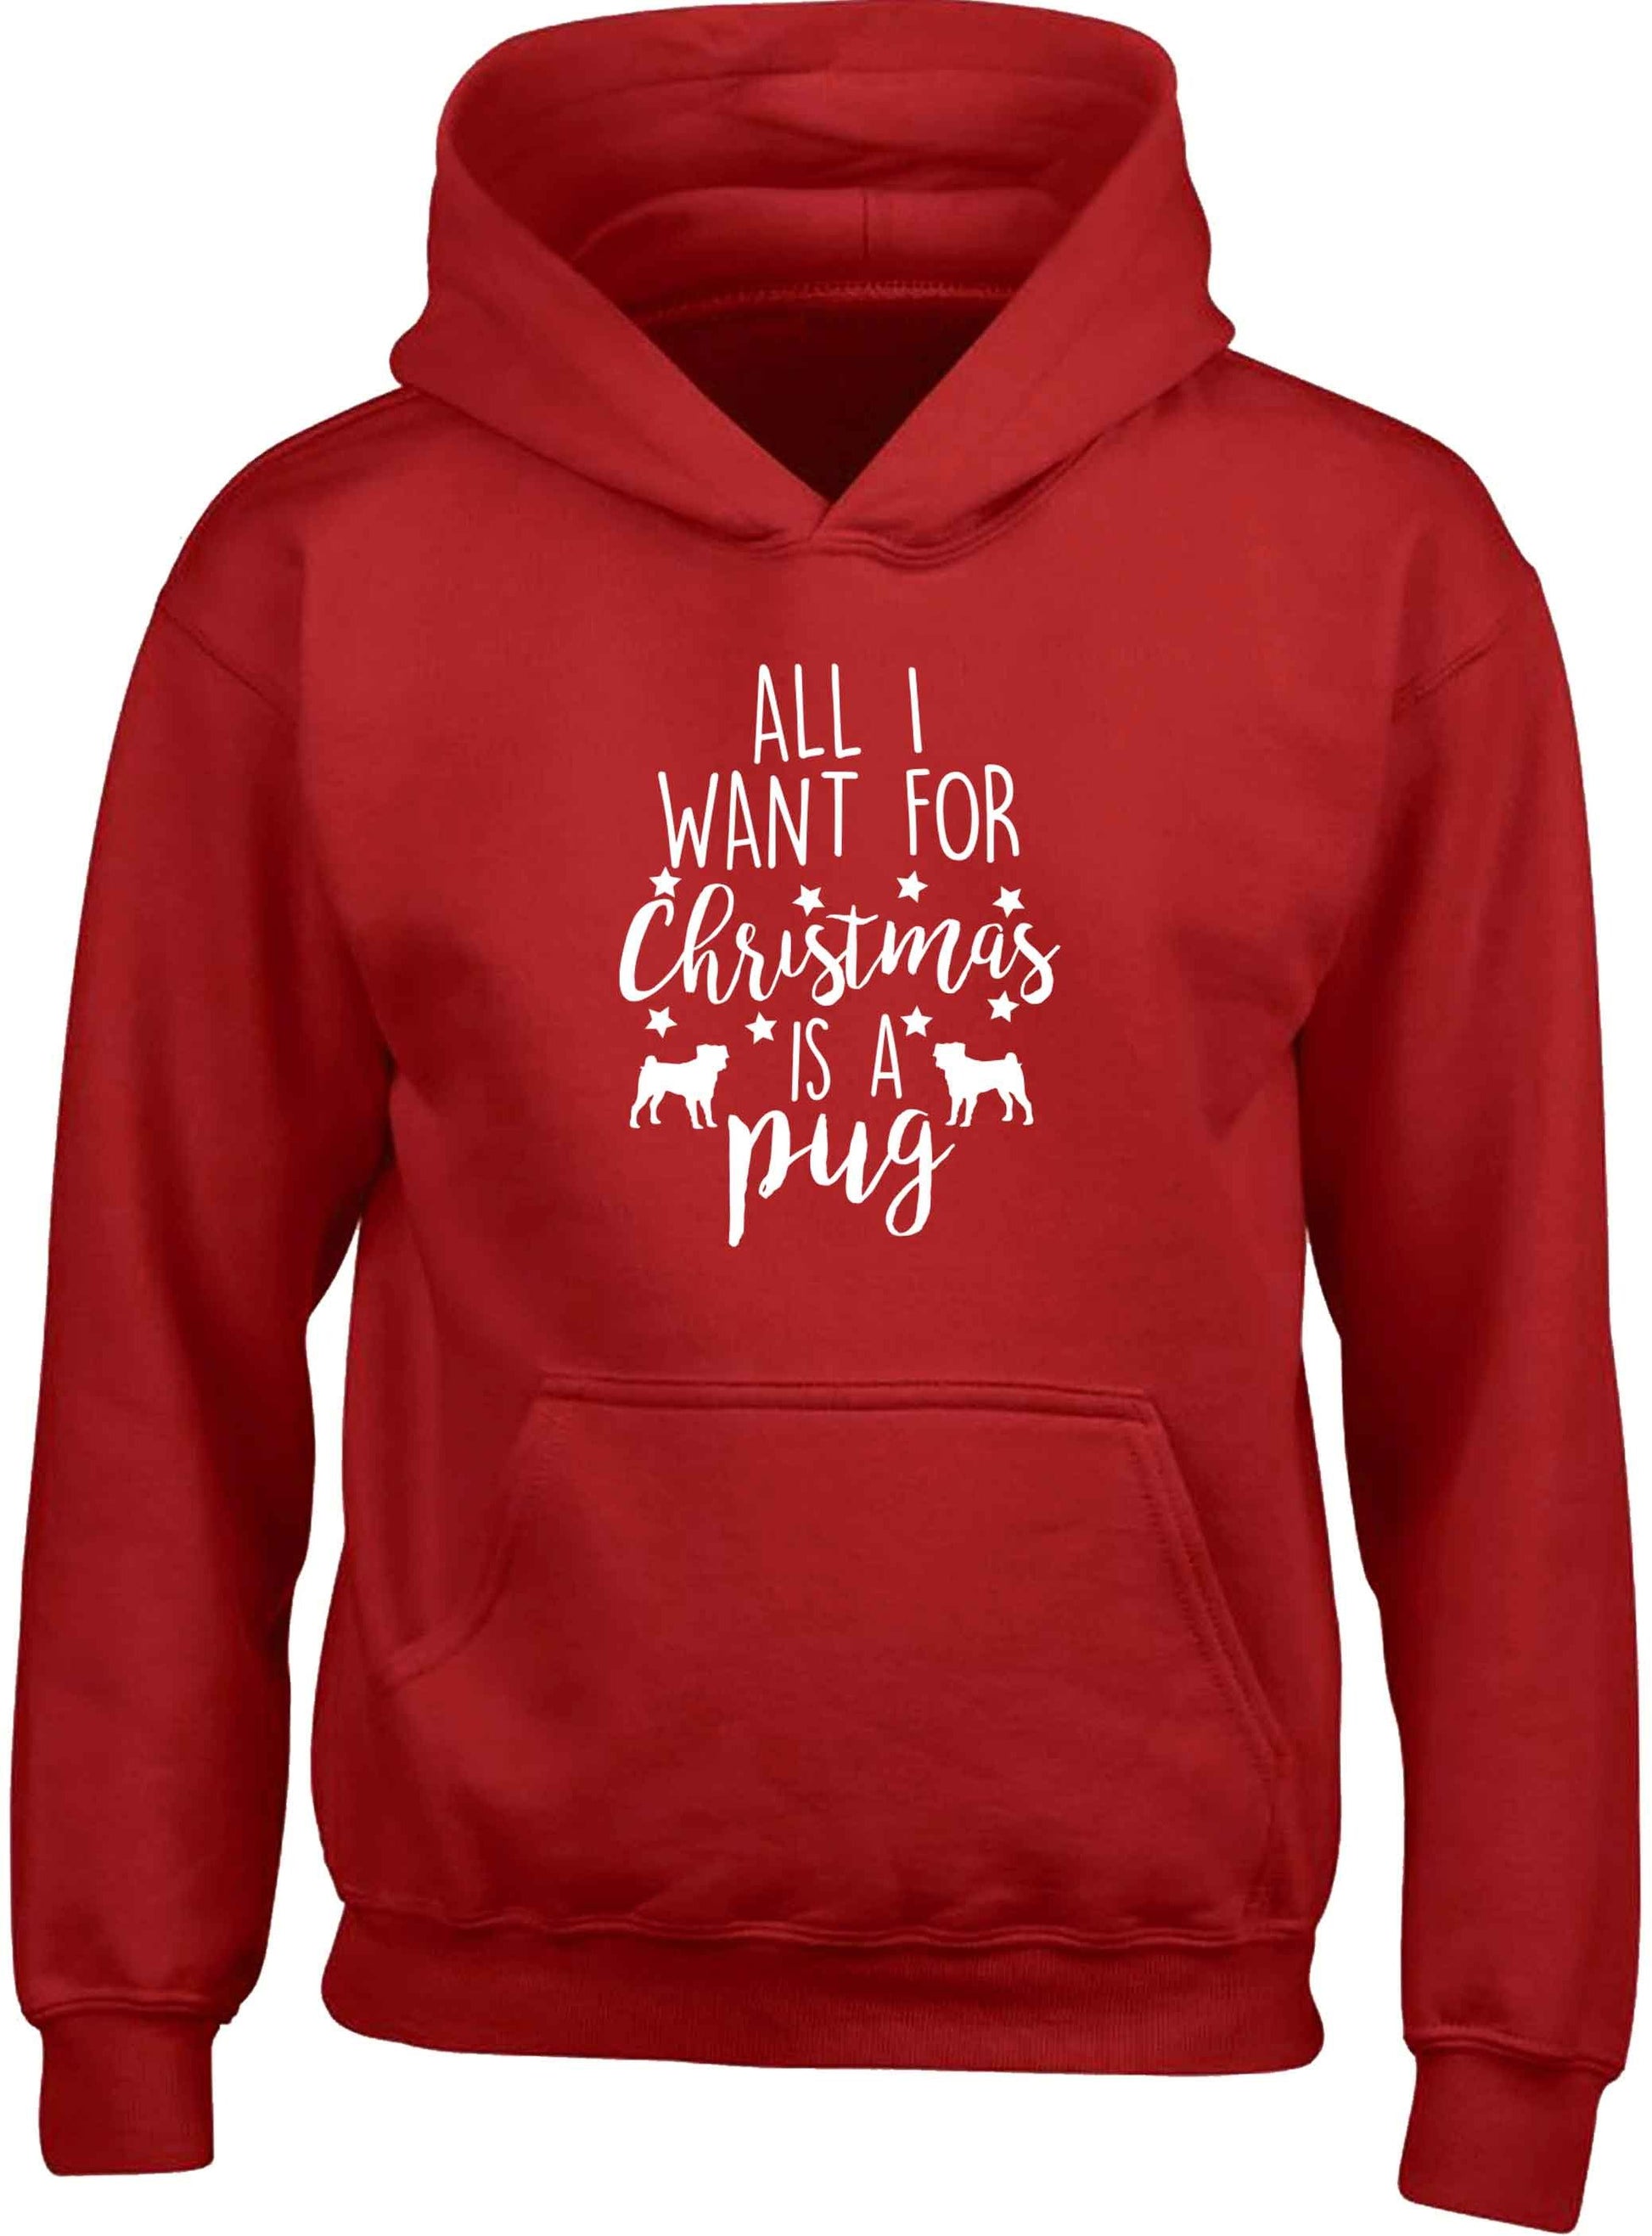 All I want for Christmas is a pug children's red hoodie 12-13 Years